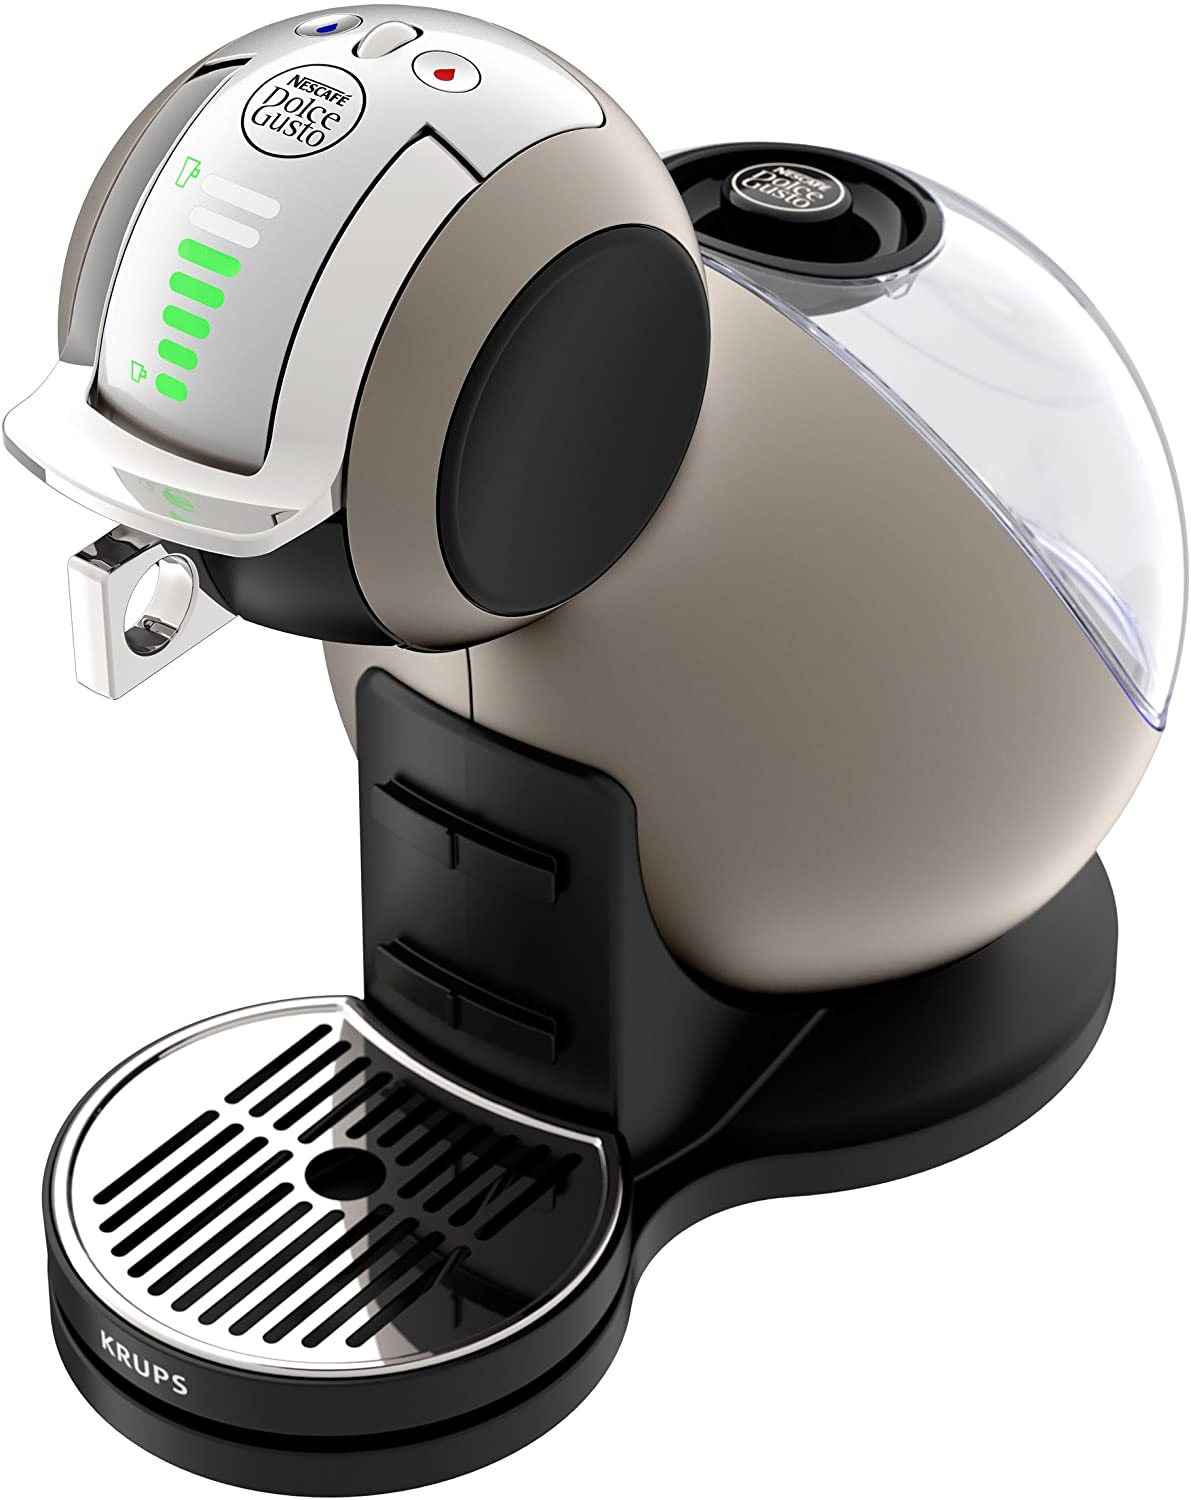 Krups Dolce Gusto Melody 3 - coffee makers (freestanding, Fully-auto, Coffee capsule, Caffe latte, Caffe lungo, Cappuccino, Espresso, Black)